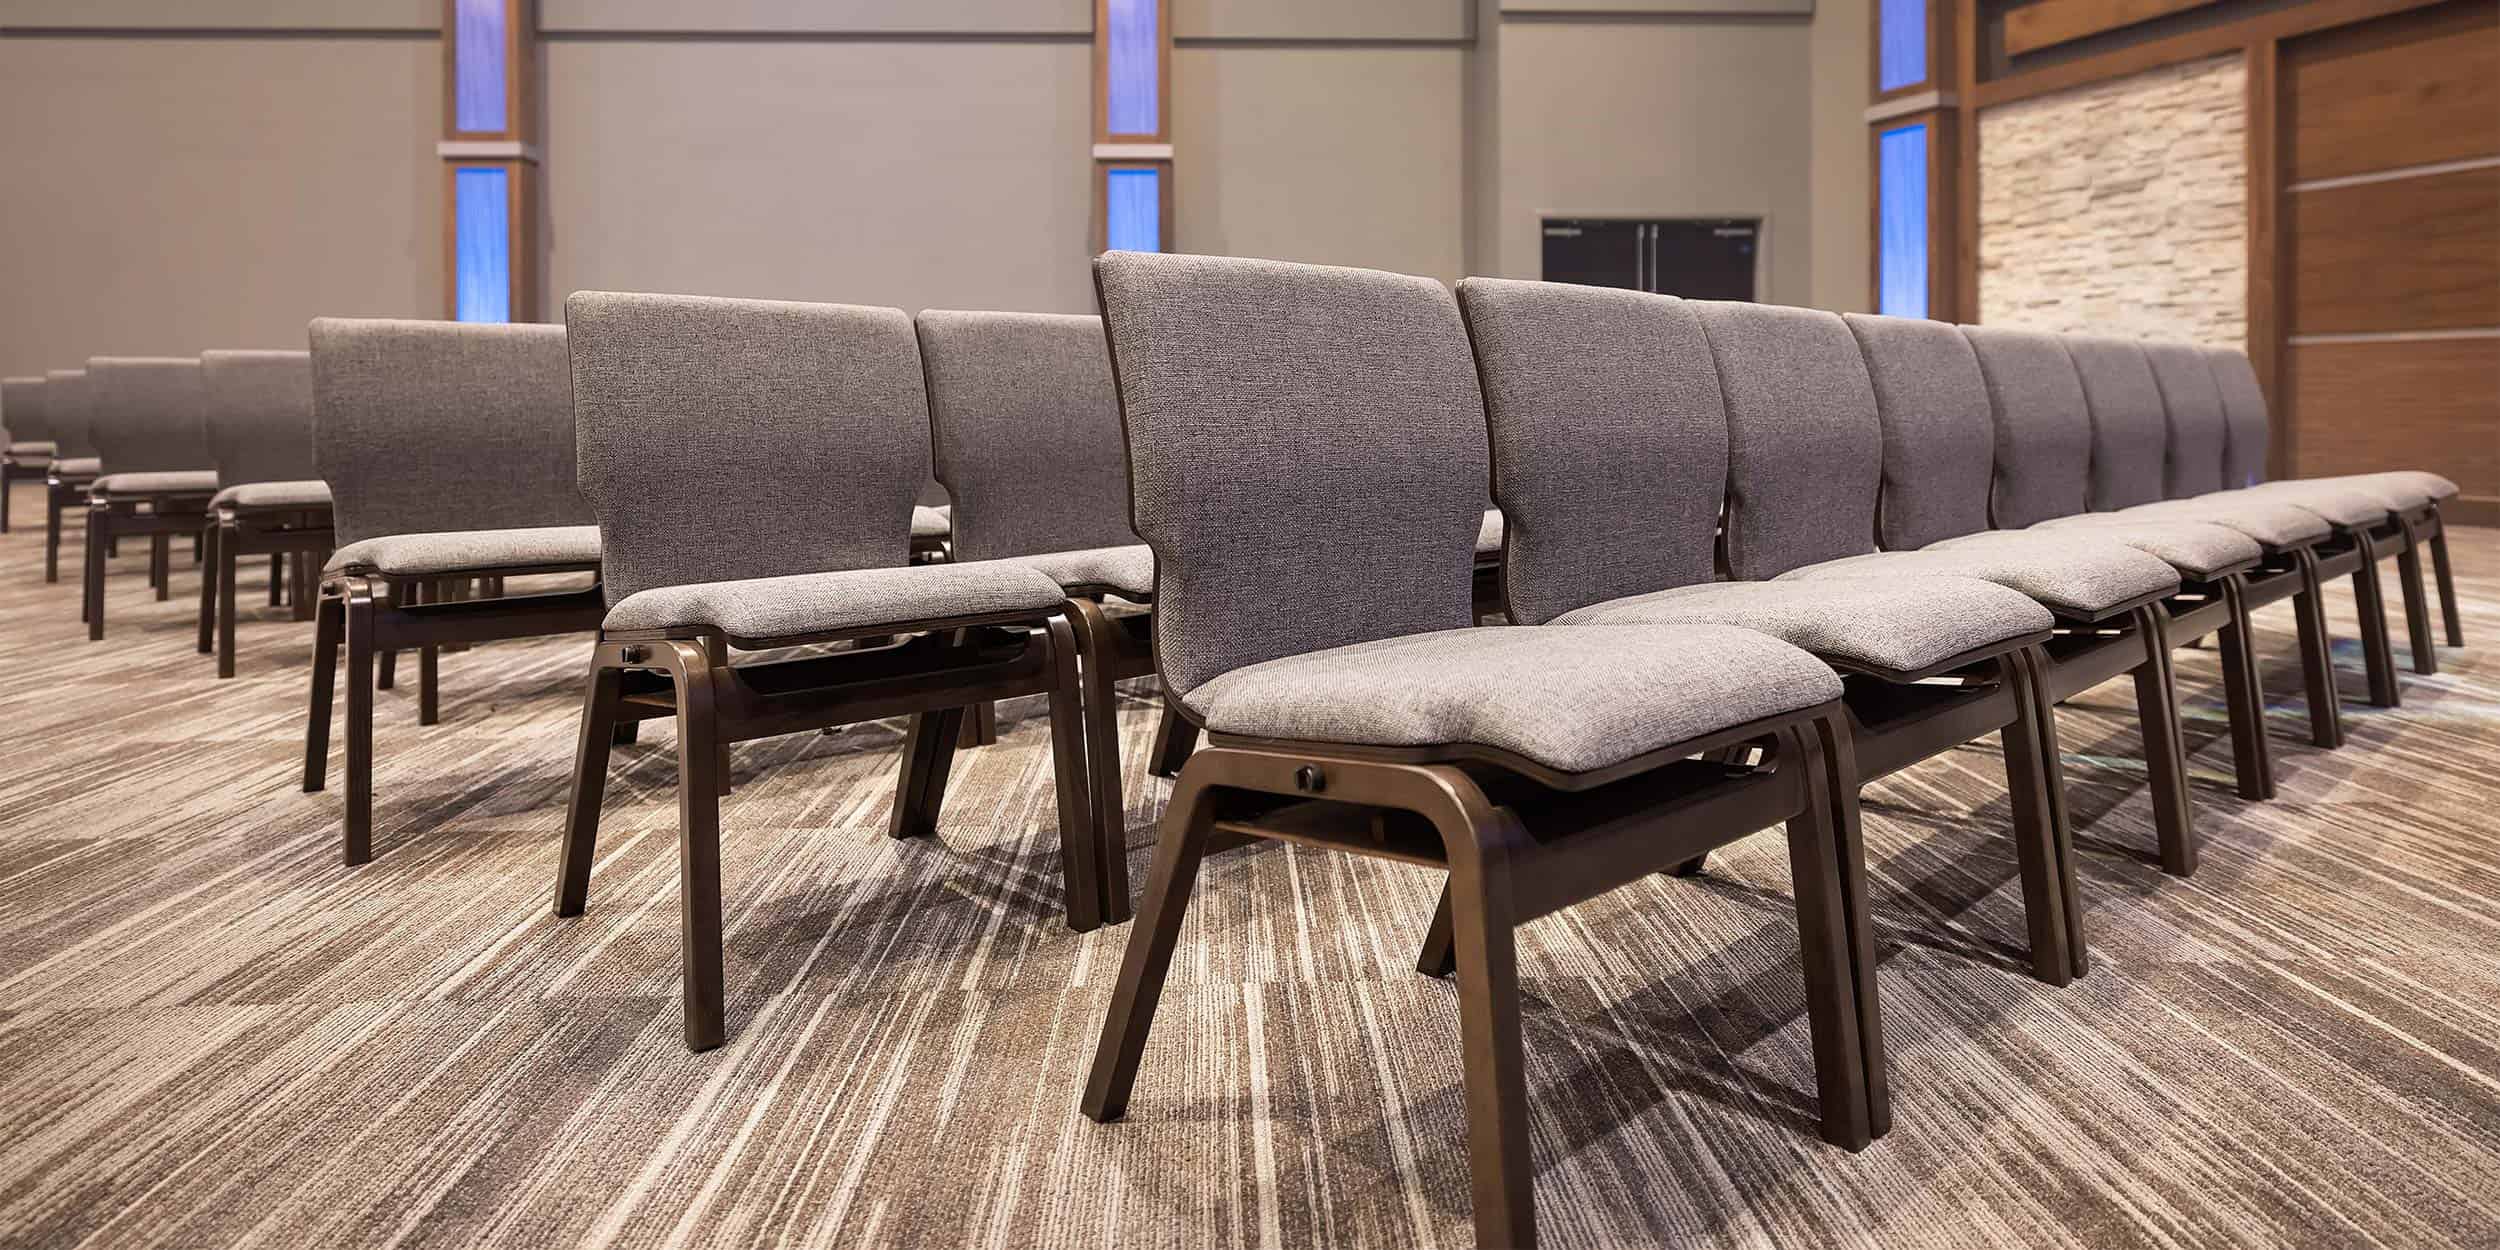 Sauder Wood Worship Chairs from the Vantage Collection